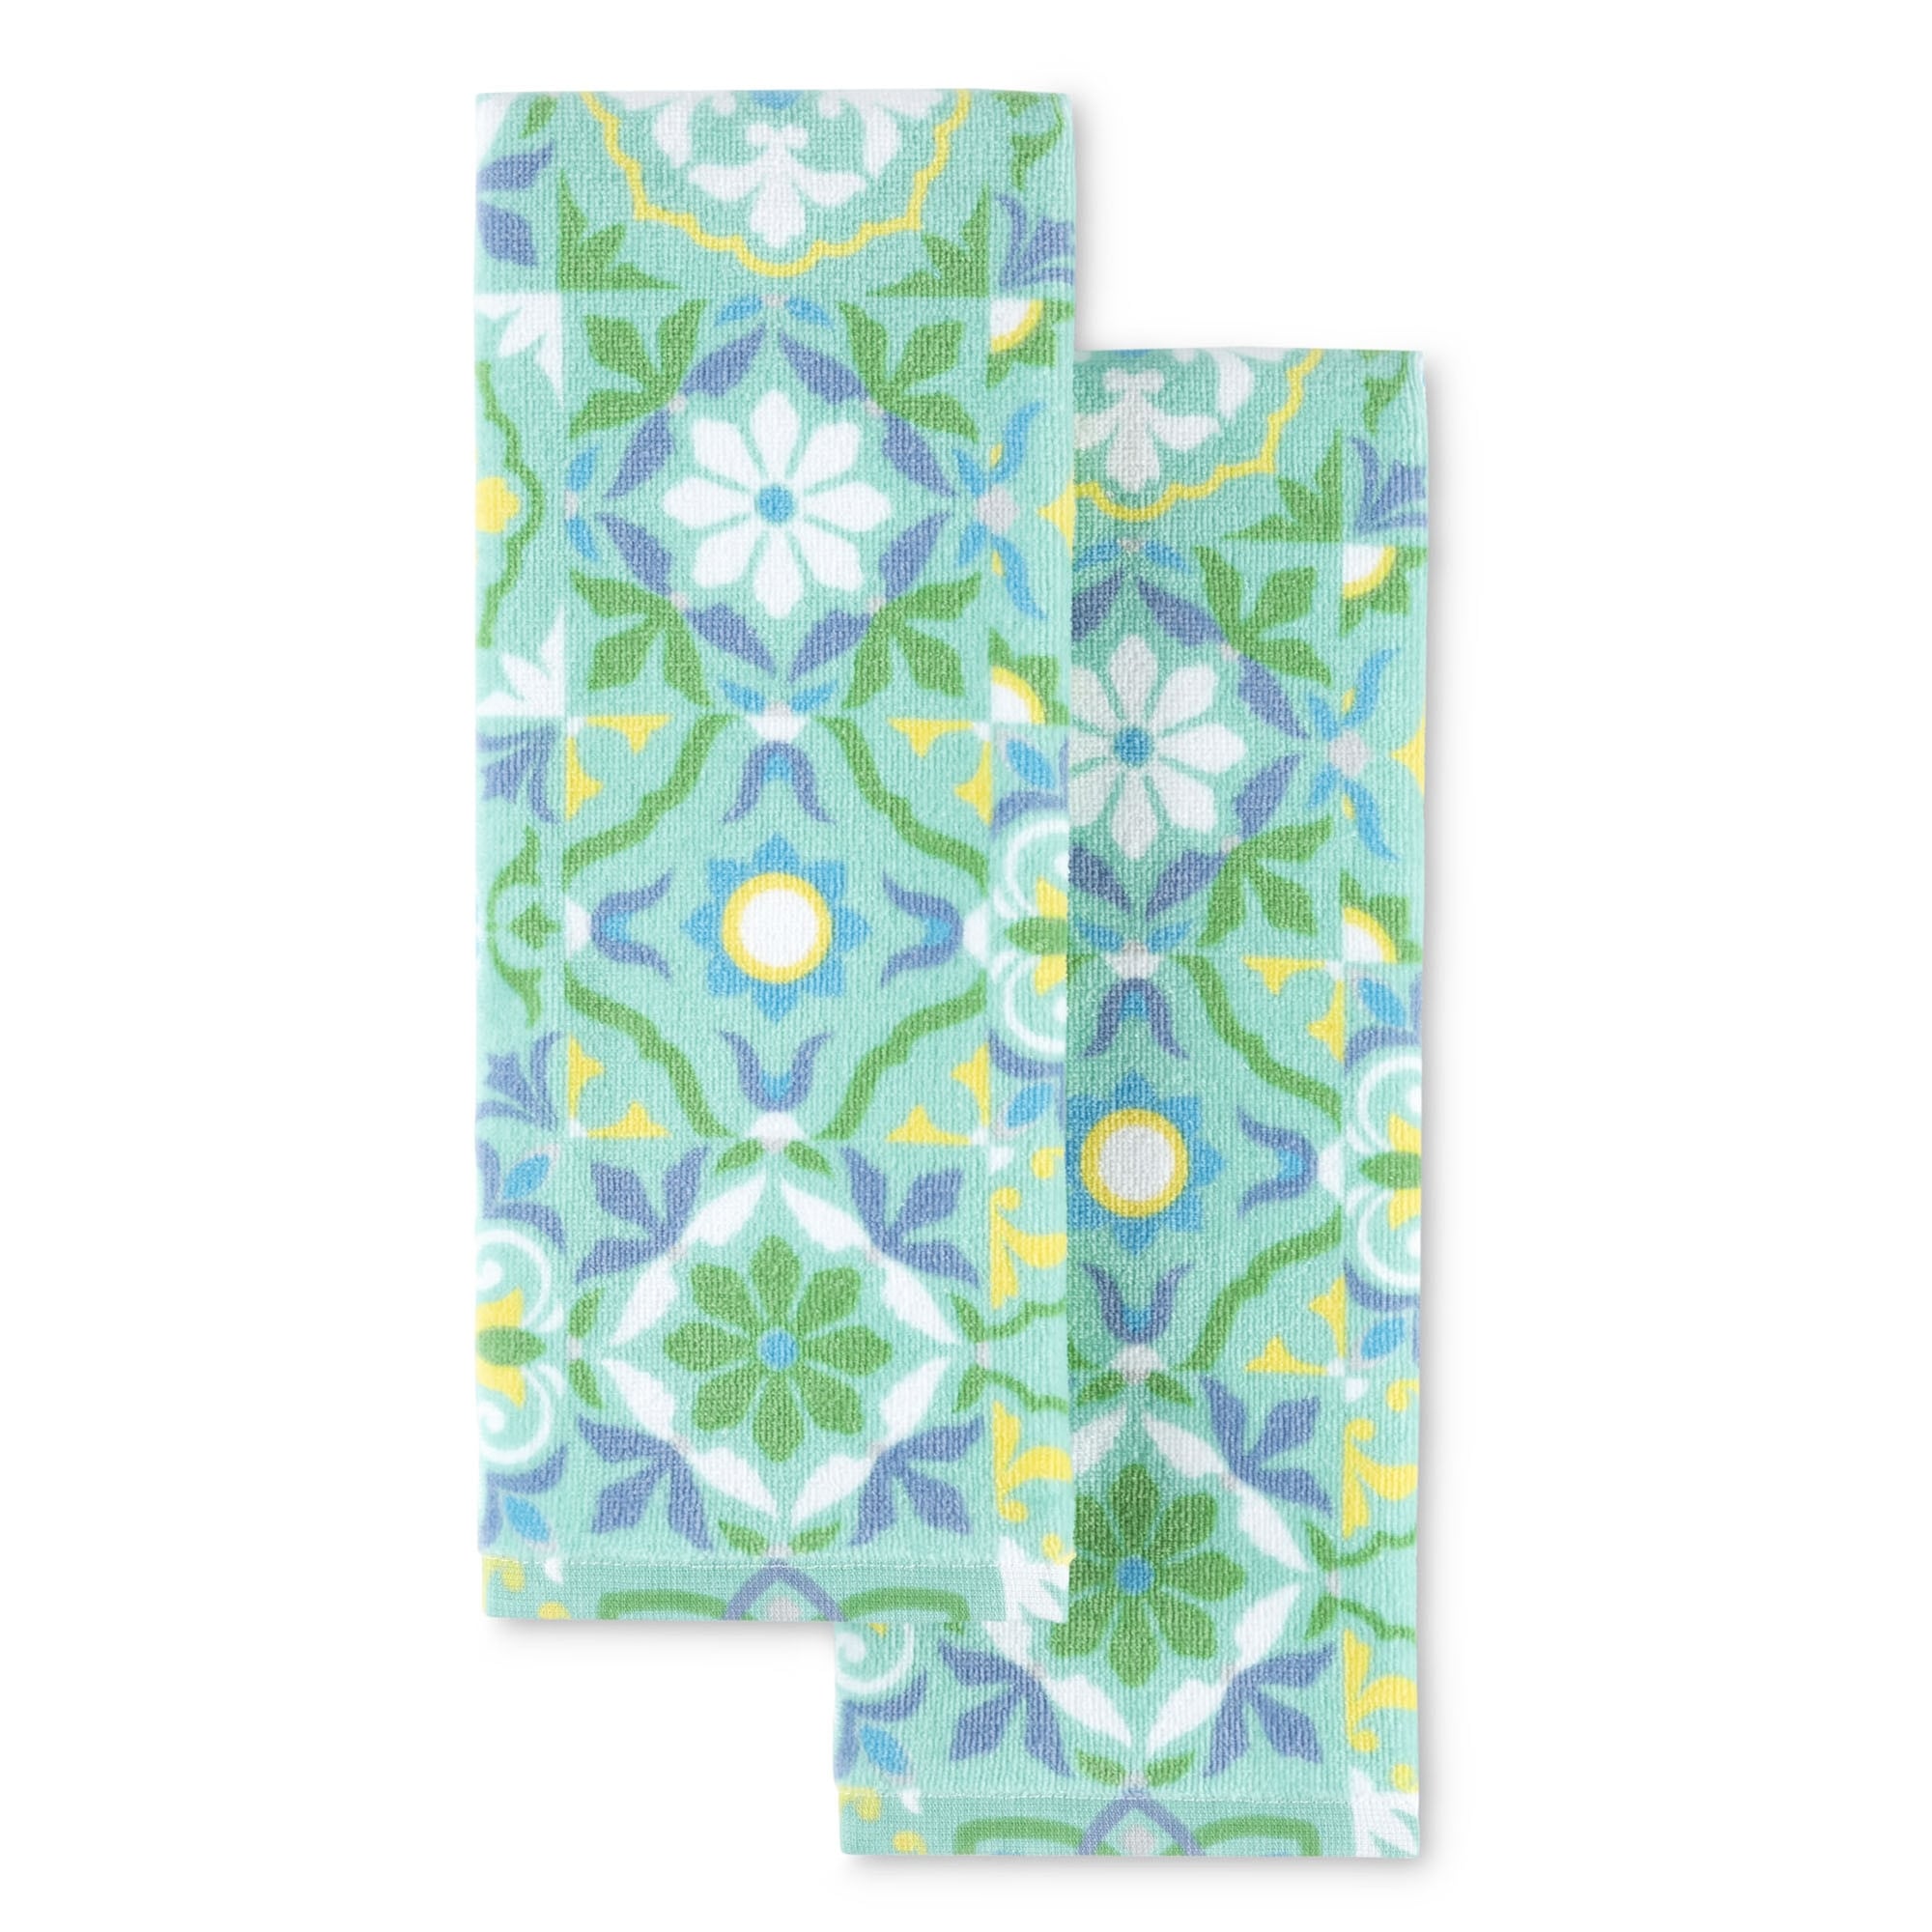 https://ak1.ostkcdn.com/images/products/is/images/direct/ca3e850f352acb51a5caff02f68c29adc7ef6c87/Fiesta-Worn-Tiles-Kitchen-Towels-2-Pack-Set%2C-16%22x28%22.jpg